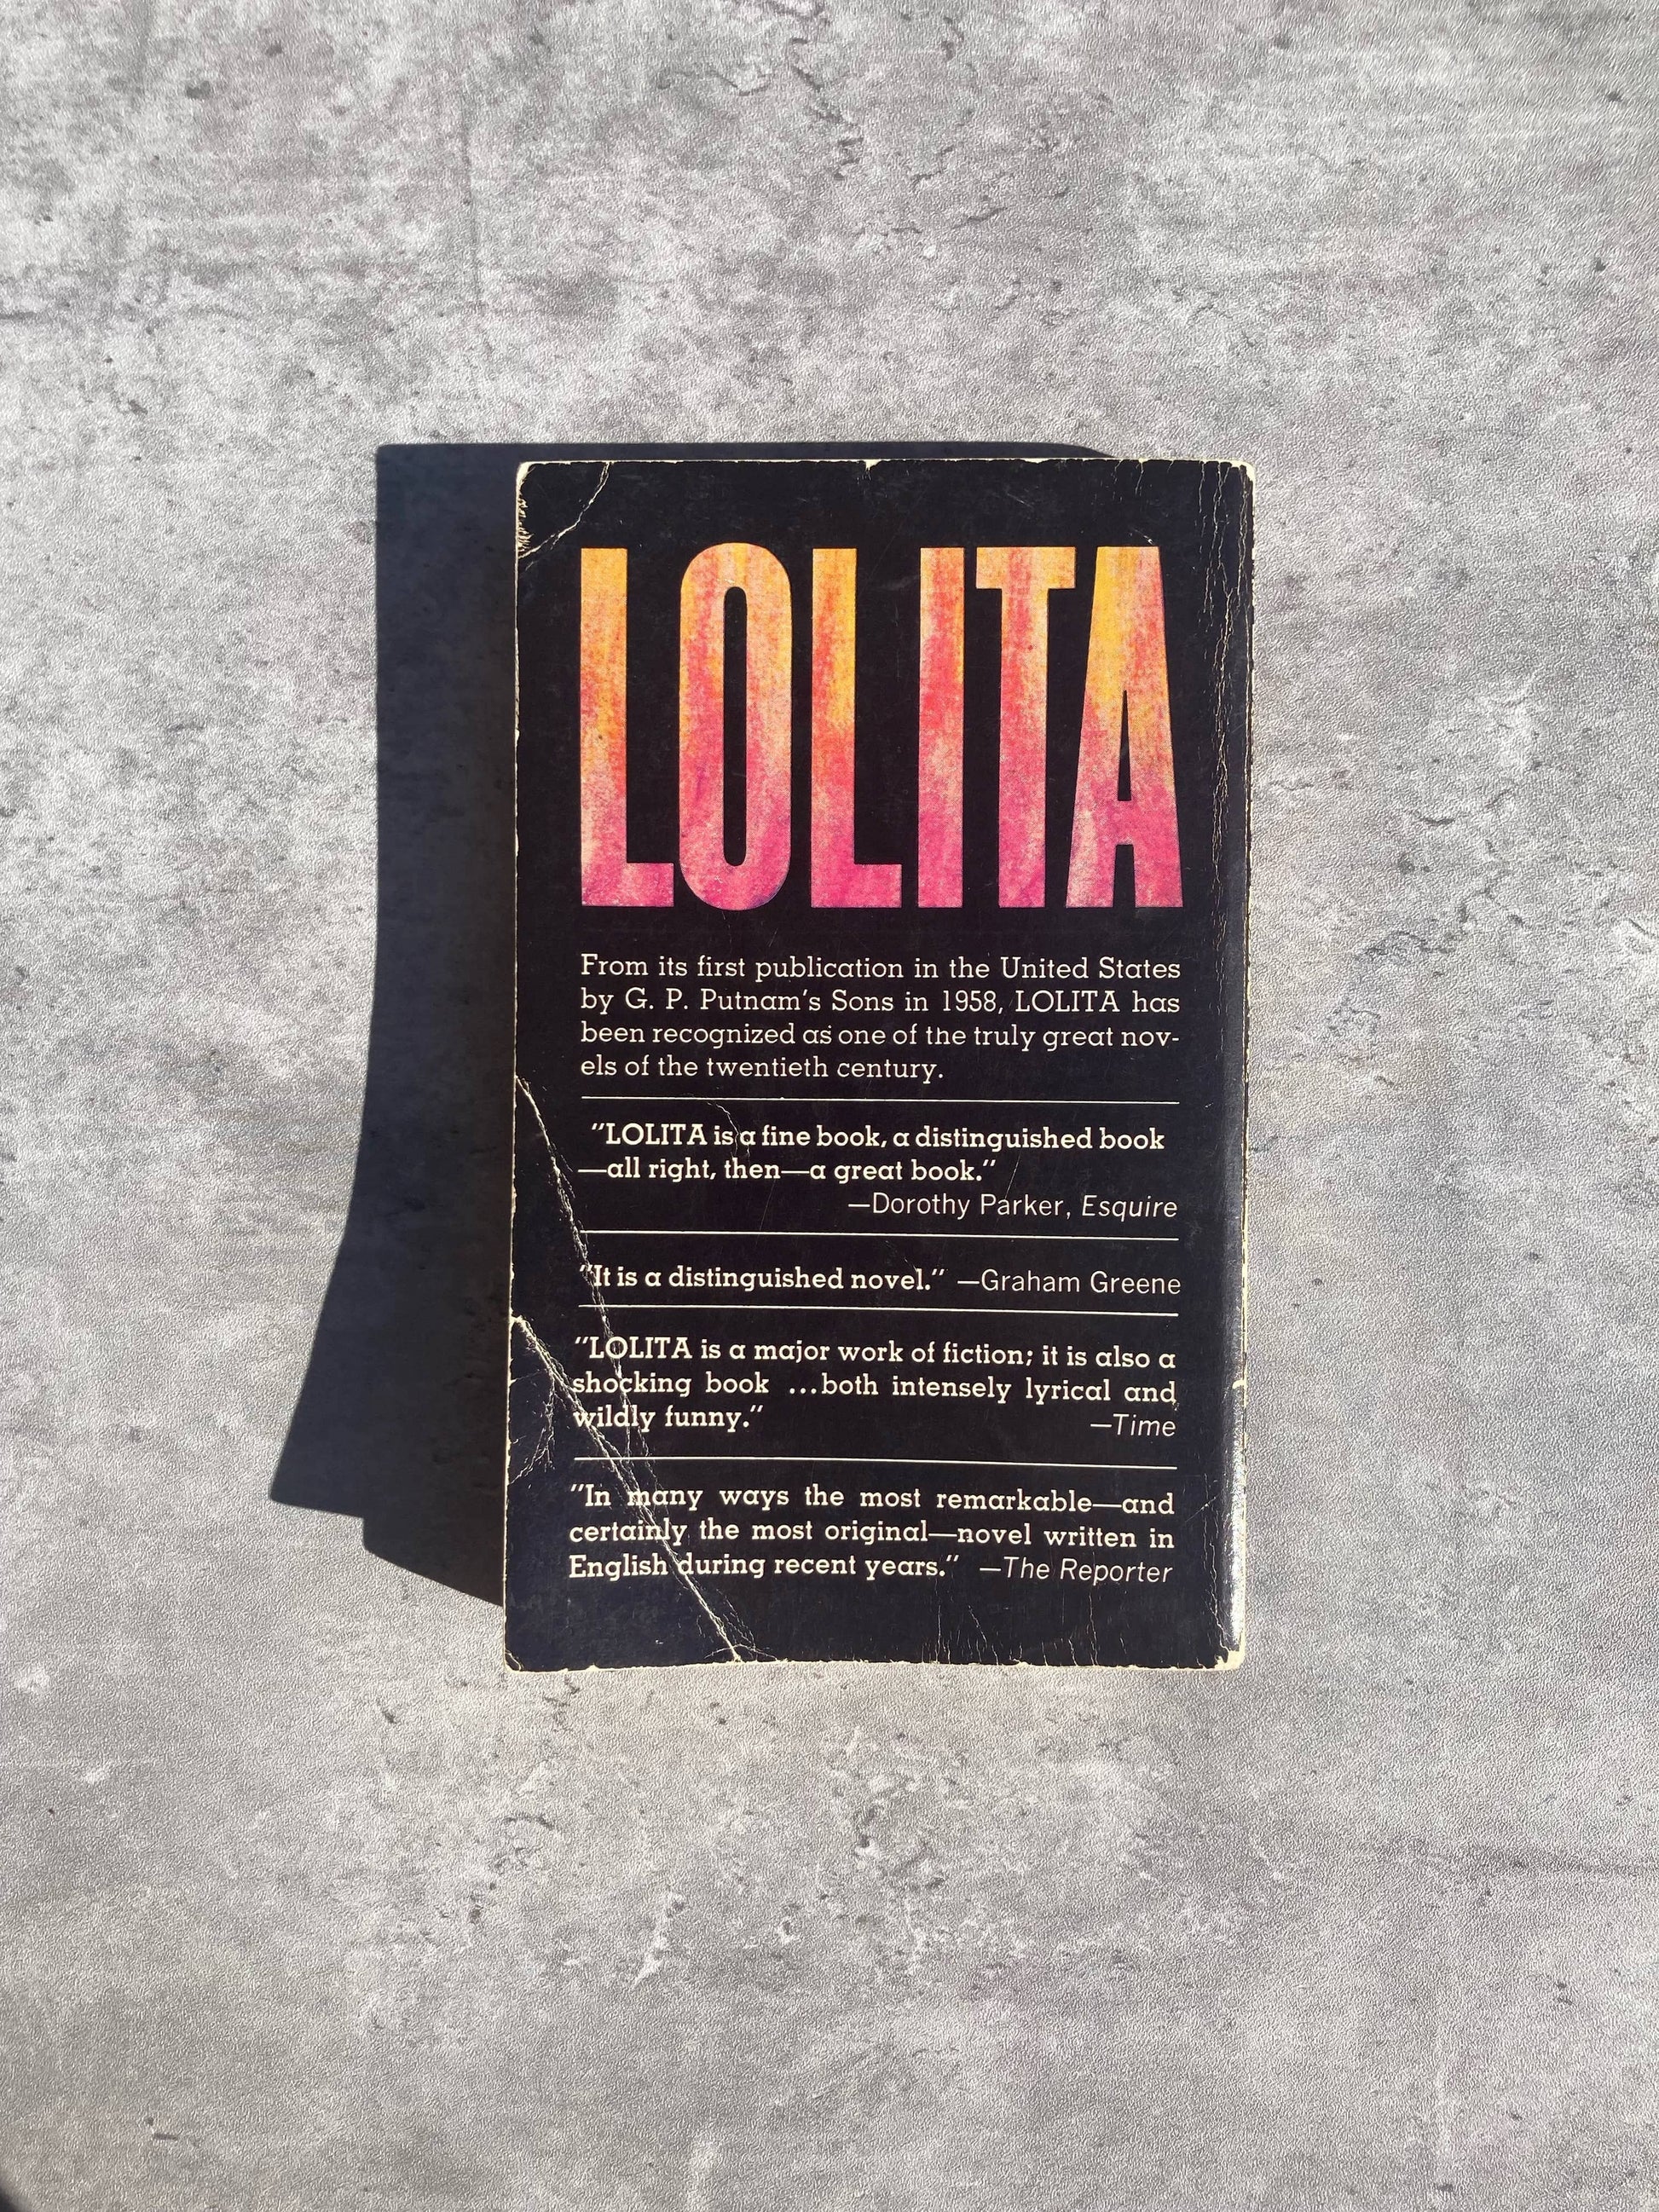 Lolita by Vladimir Nabokov. Shop for new and used books with The Stone Circle, the only online bookstore near you in Nevada City, California.